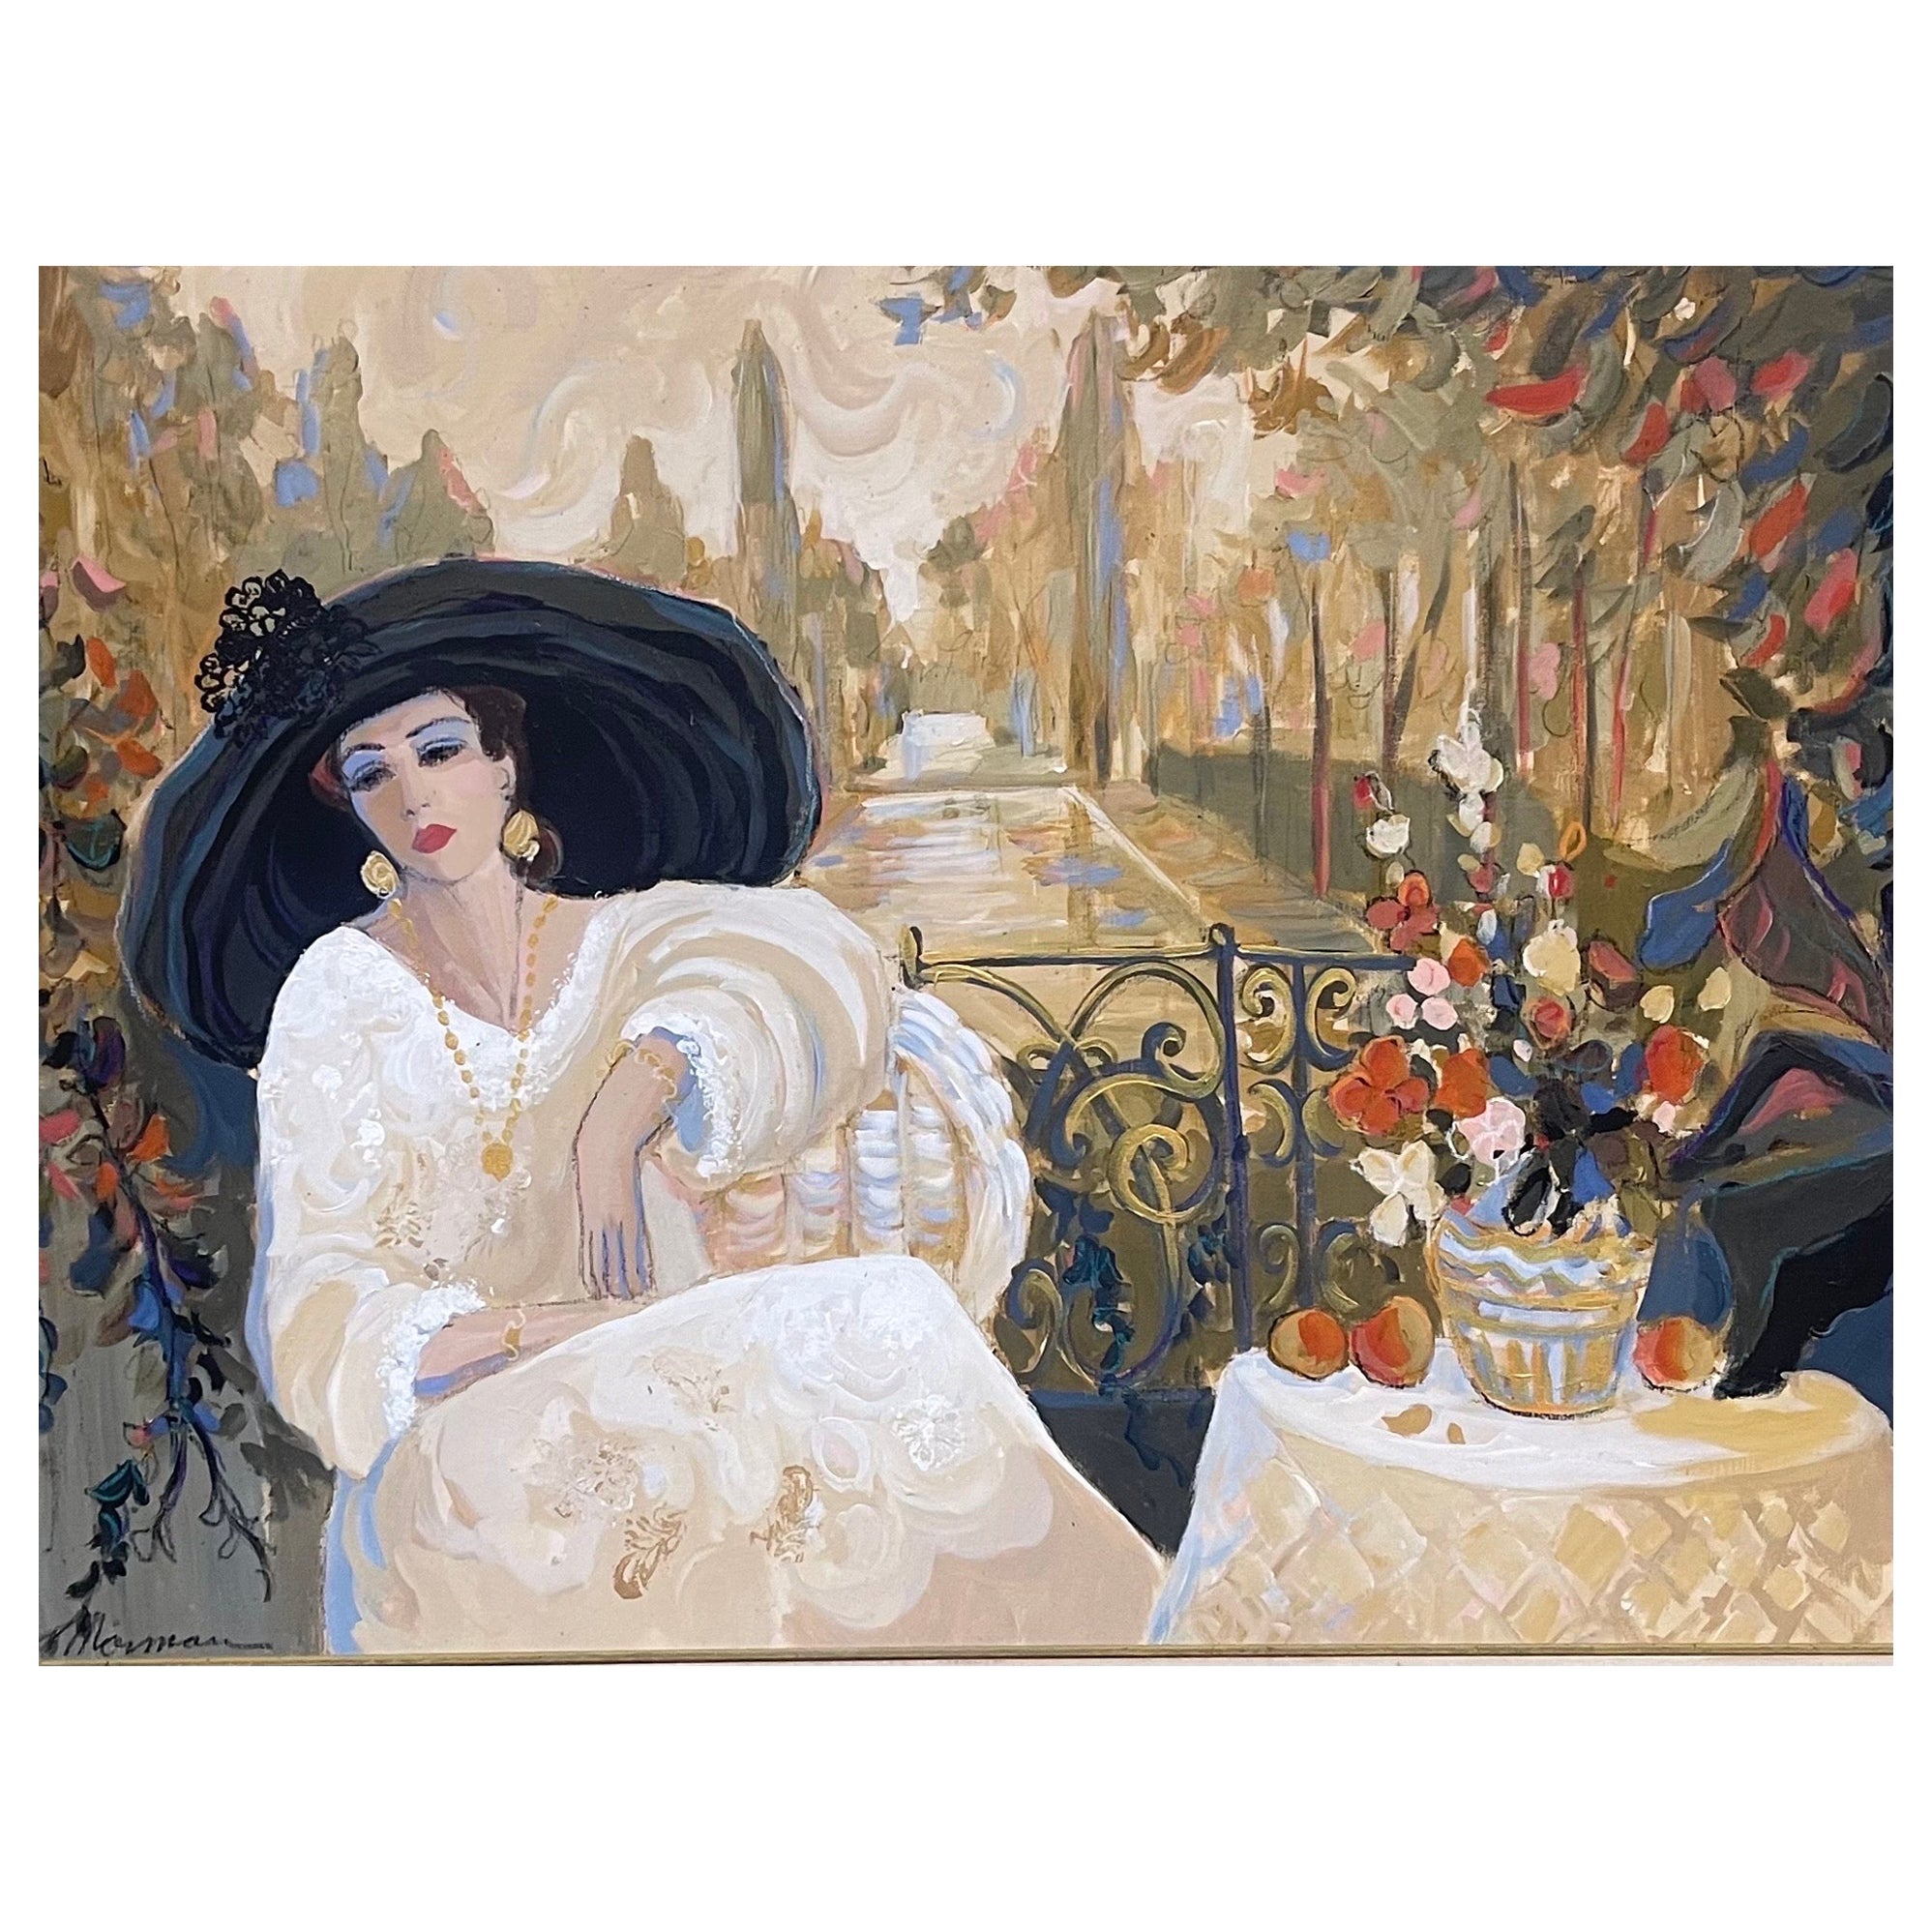 Large Original Oil on Canvas Painting by Isaac Maimon